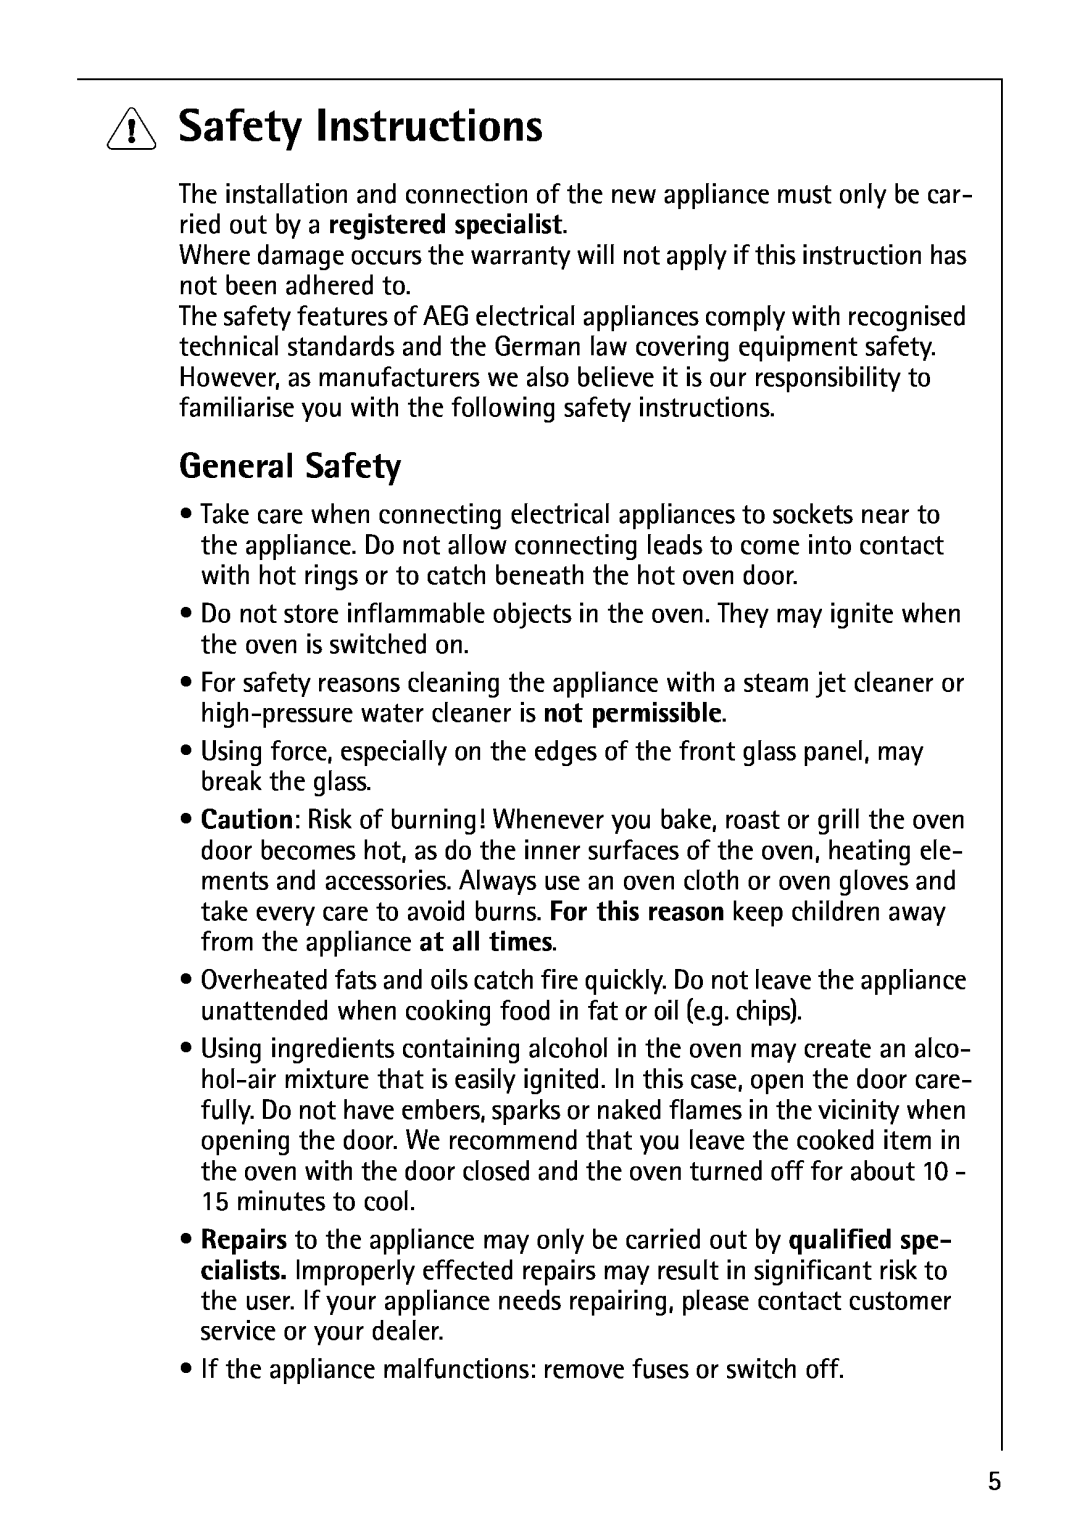 AEG E3000-1 manual 1Safety Instructions, General Safety 